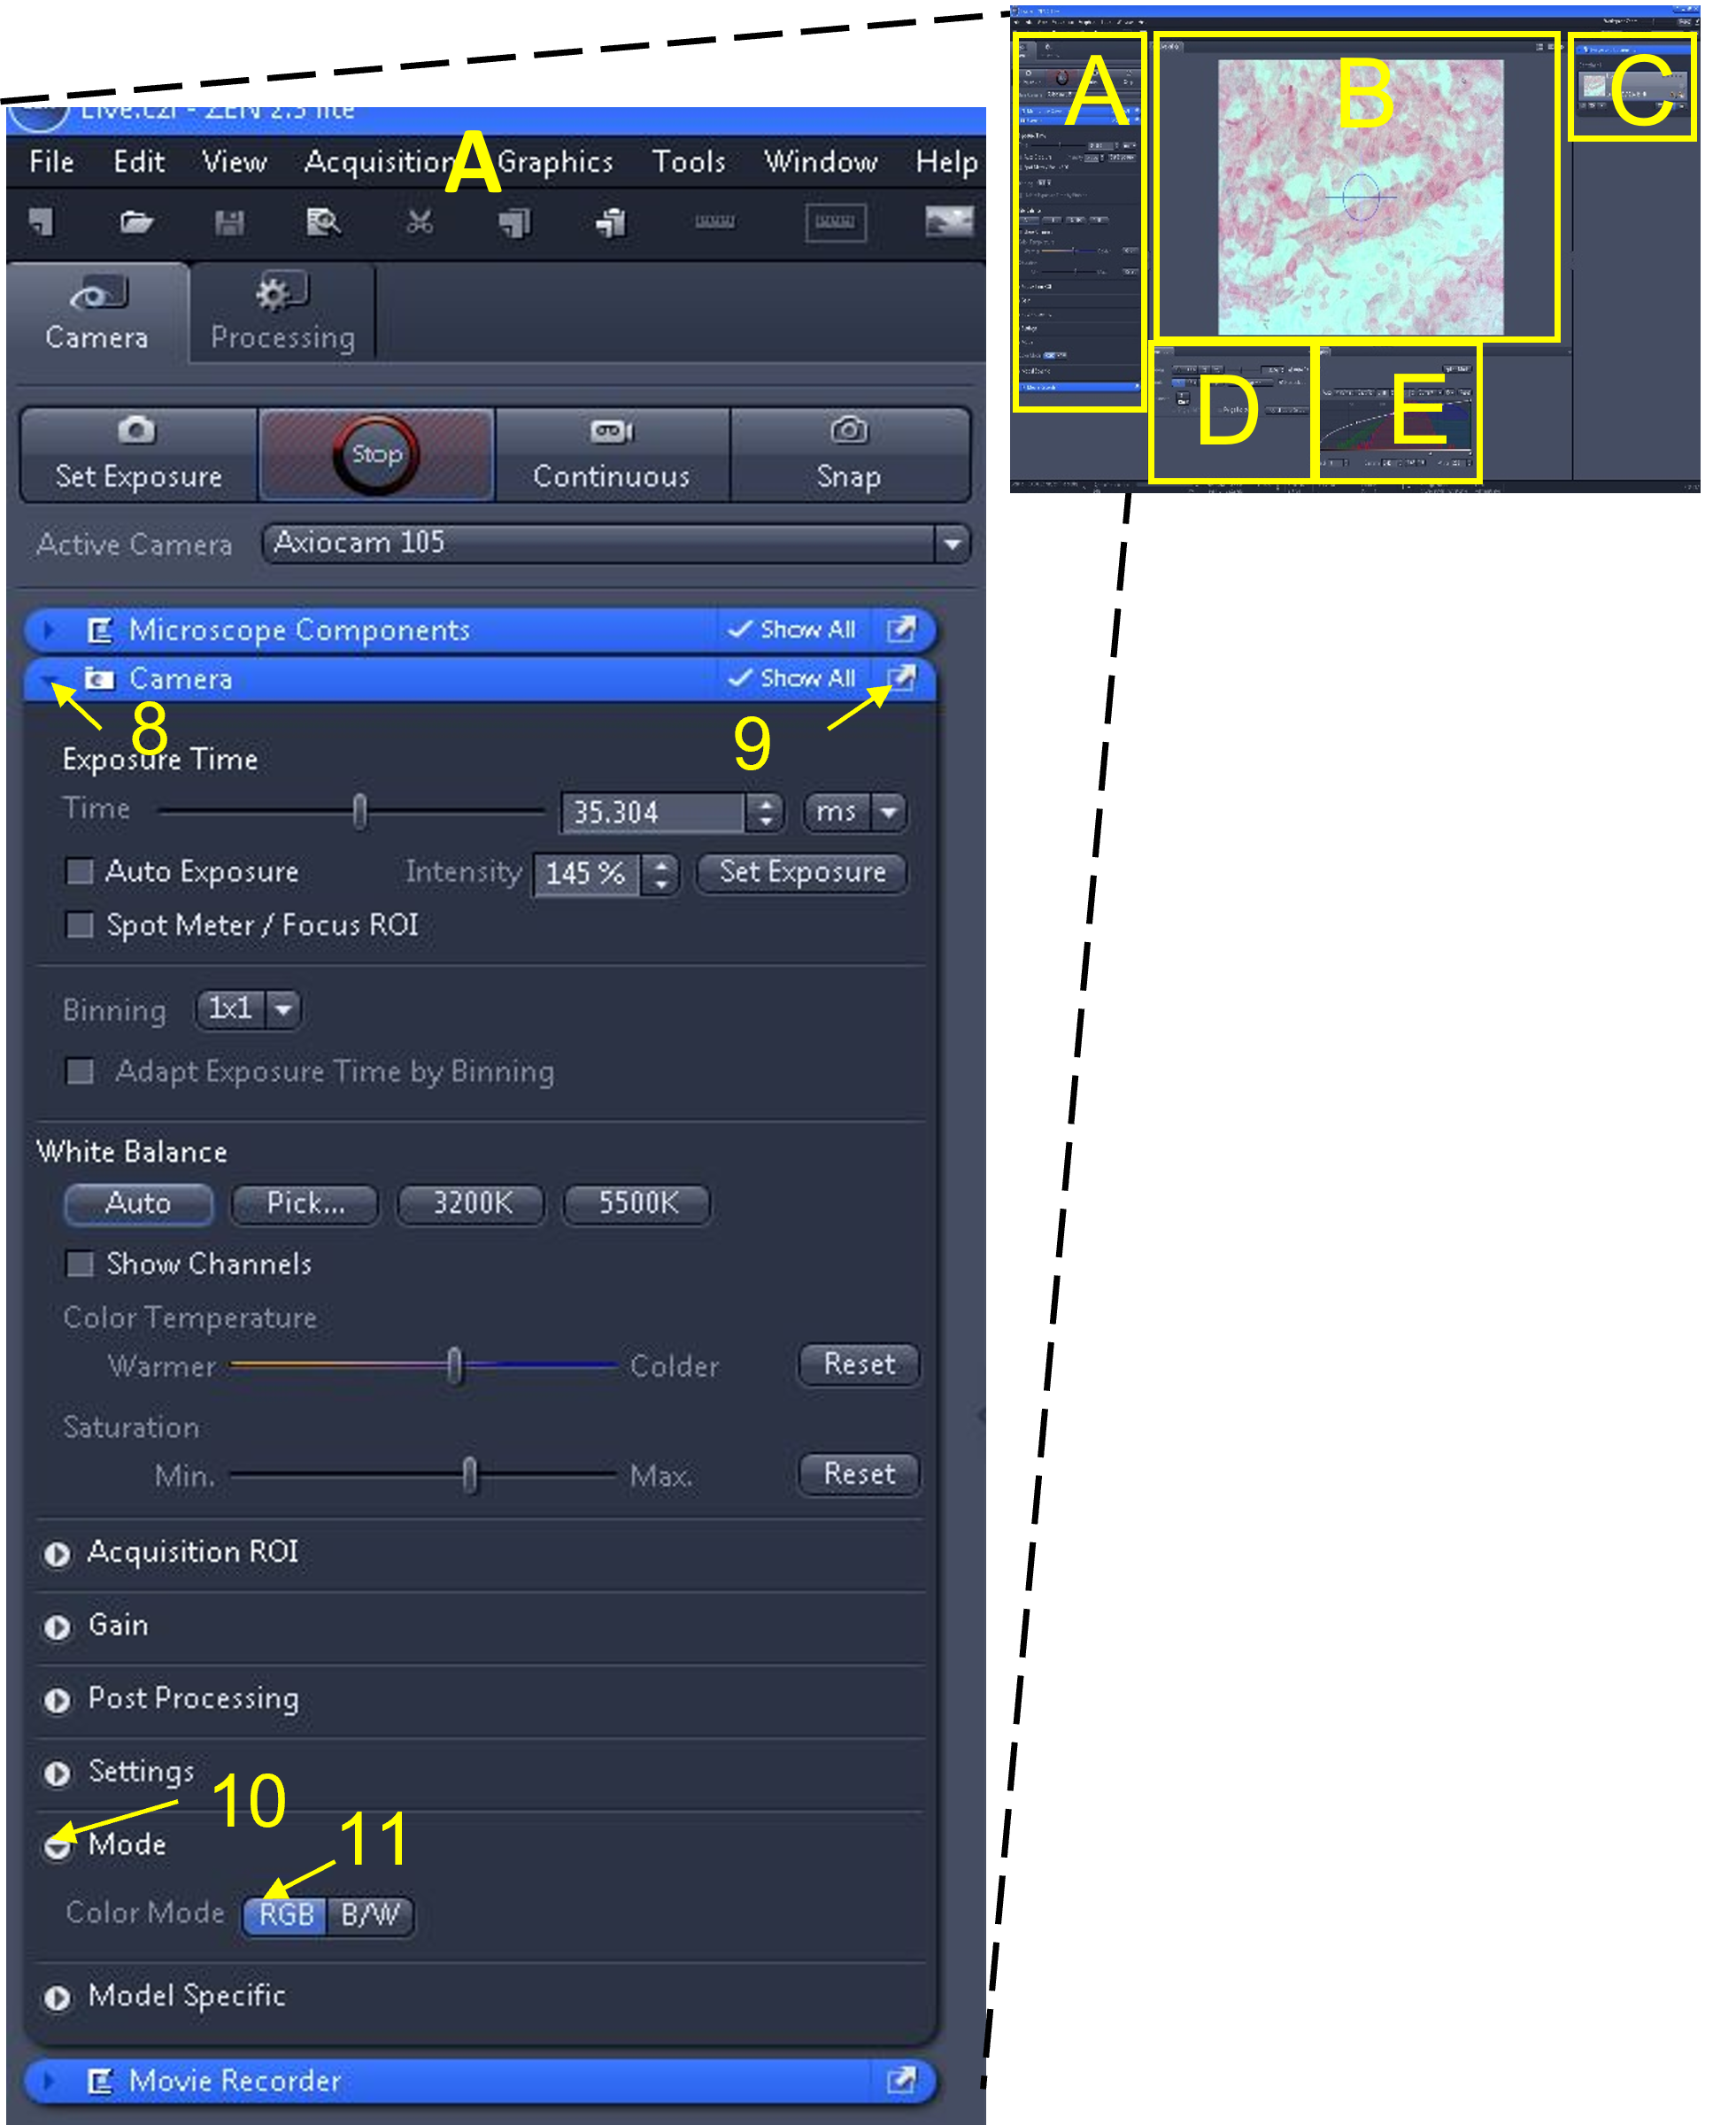 An image of the main tool area in the Zen software, showing the buttons to use to adjust the camera mode between colour and black and white.